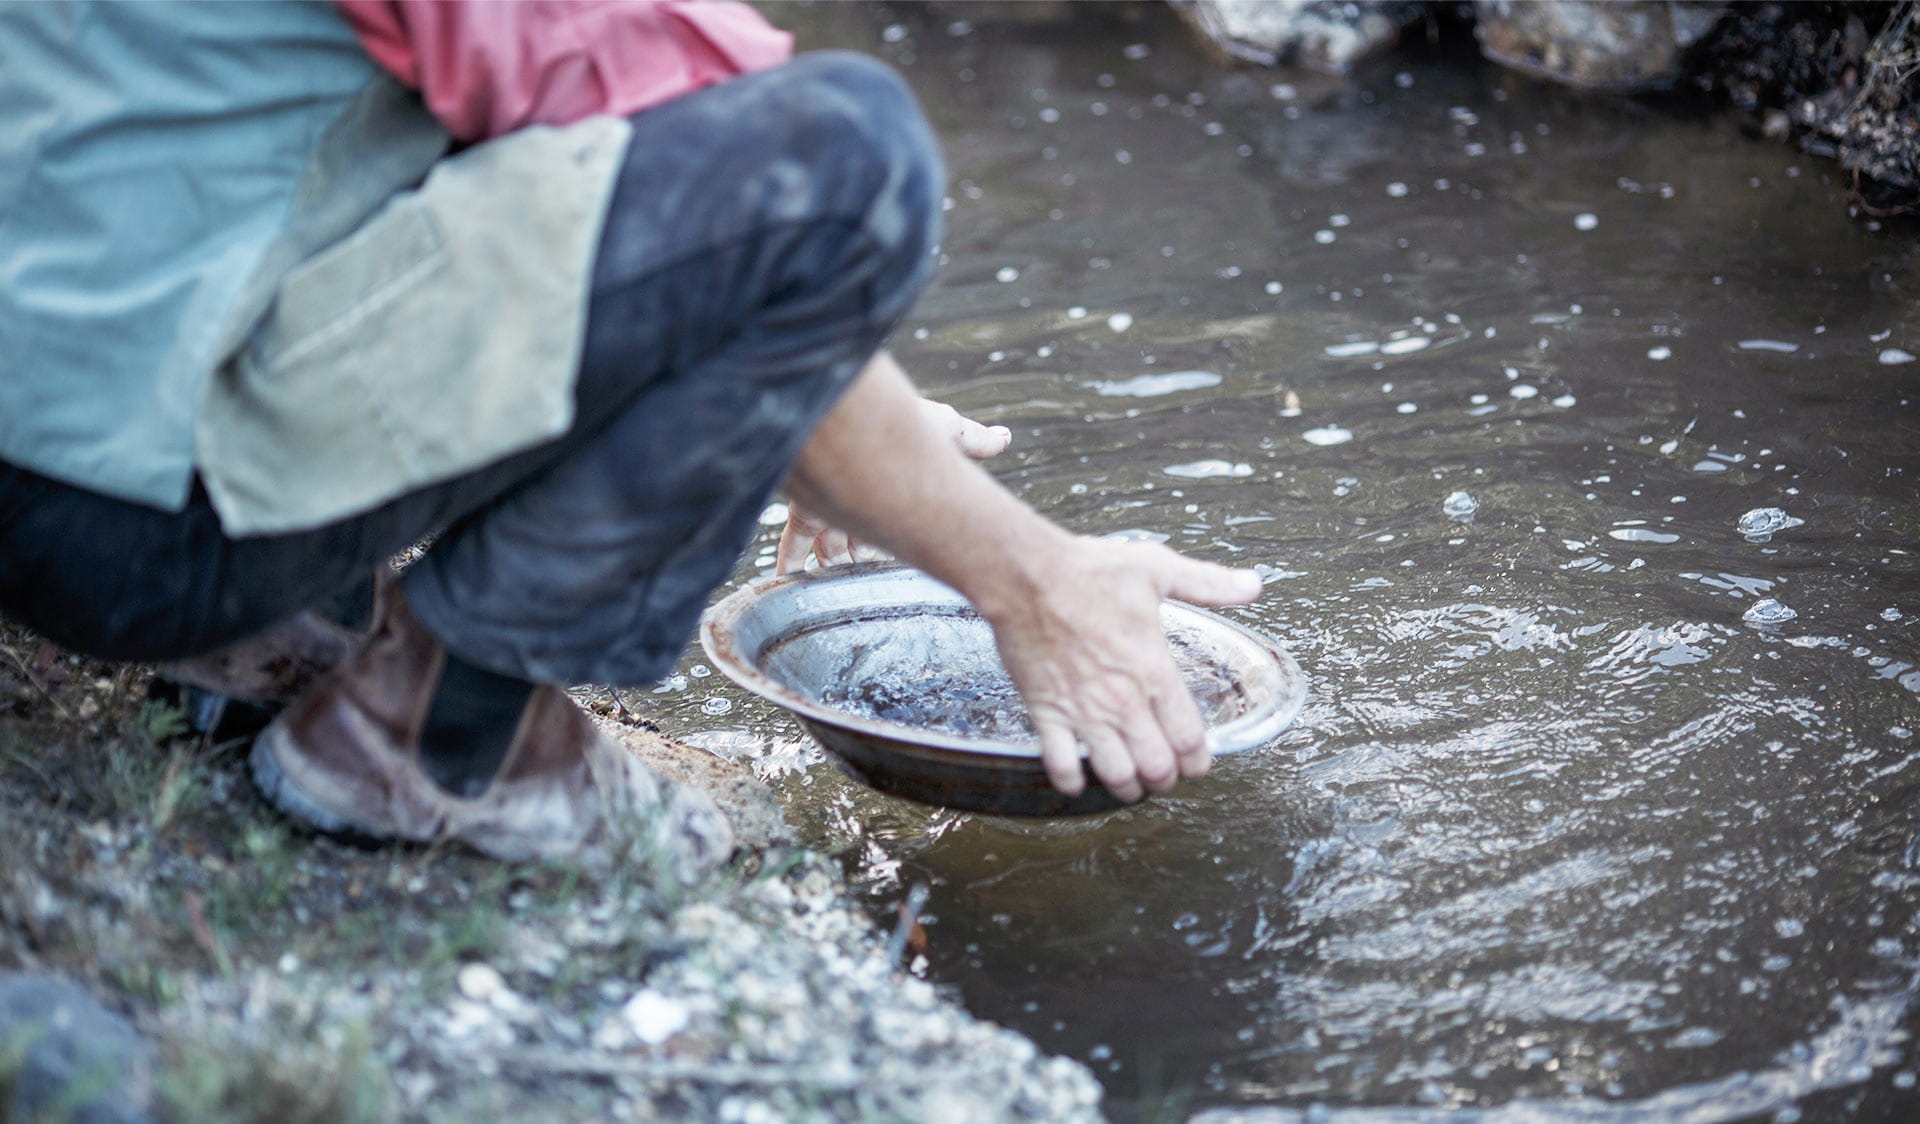 A boy crouches at the waters panning for gold in a river.